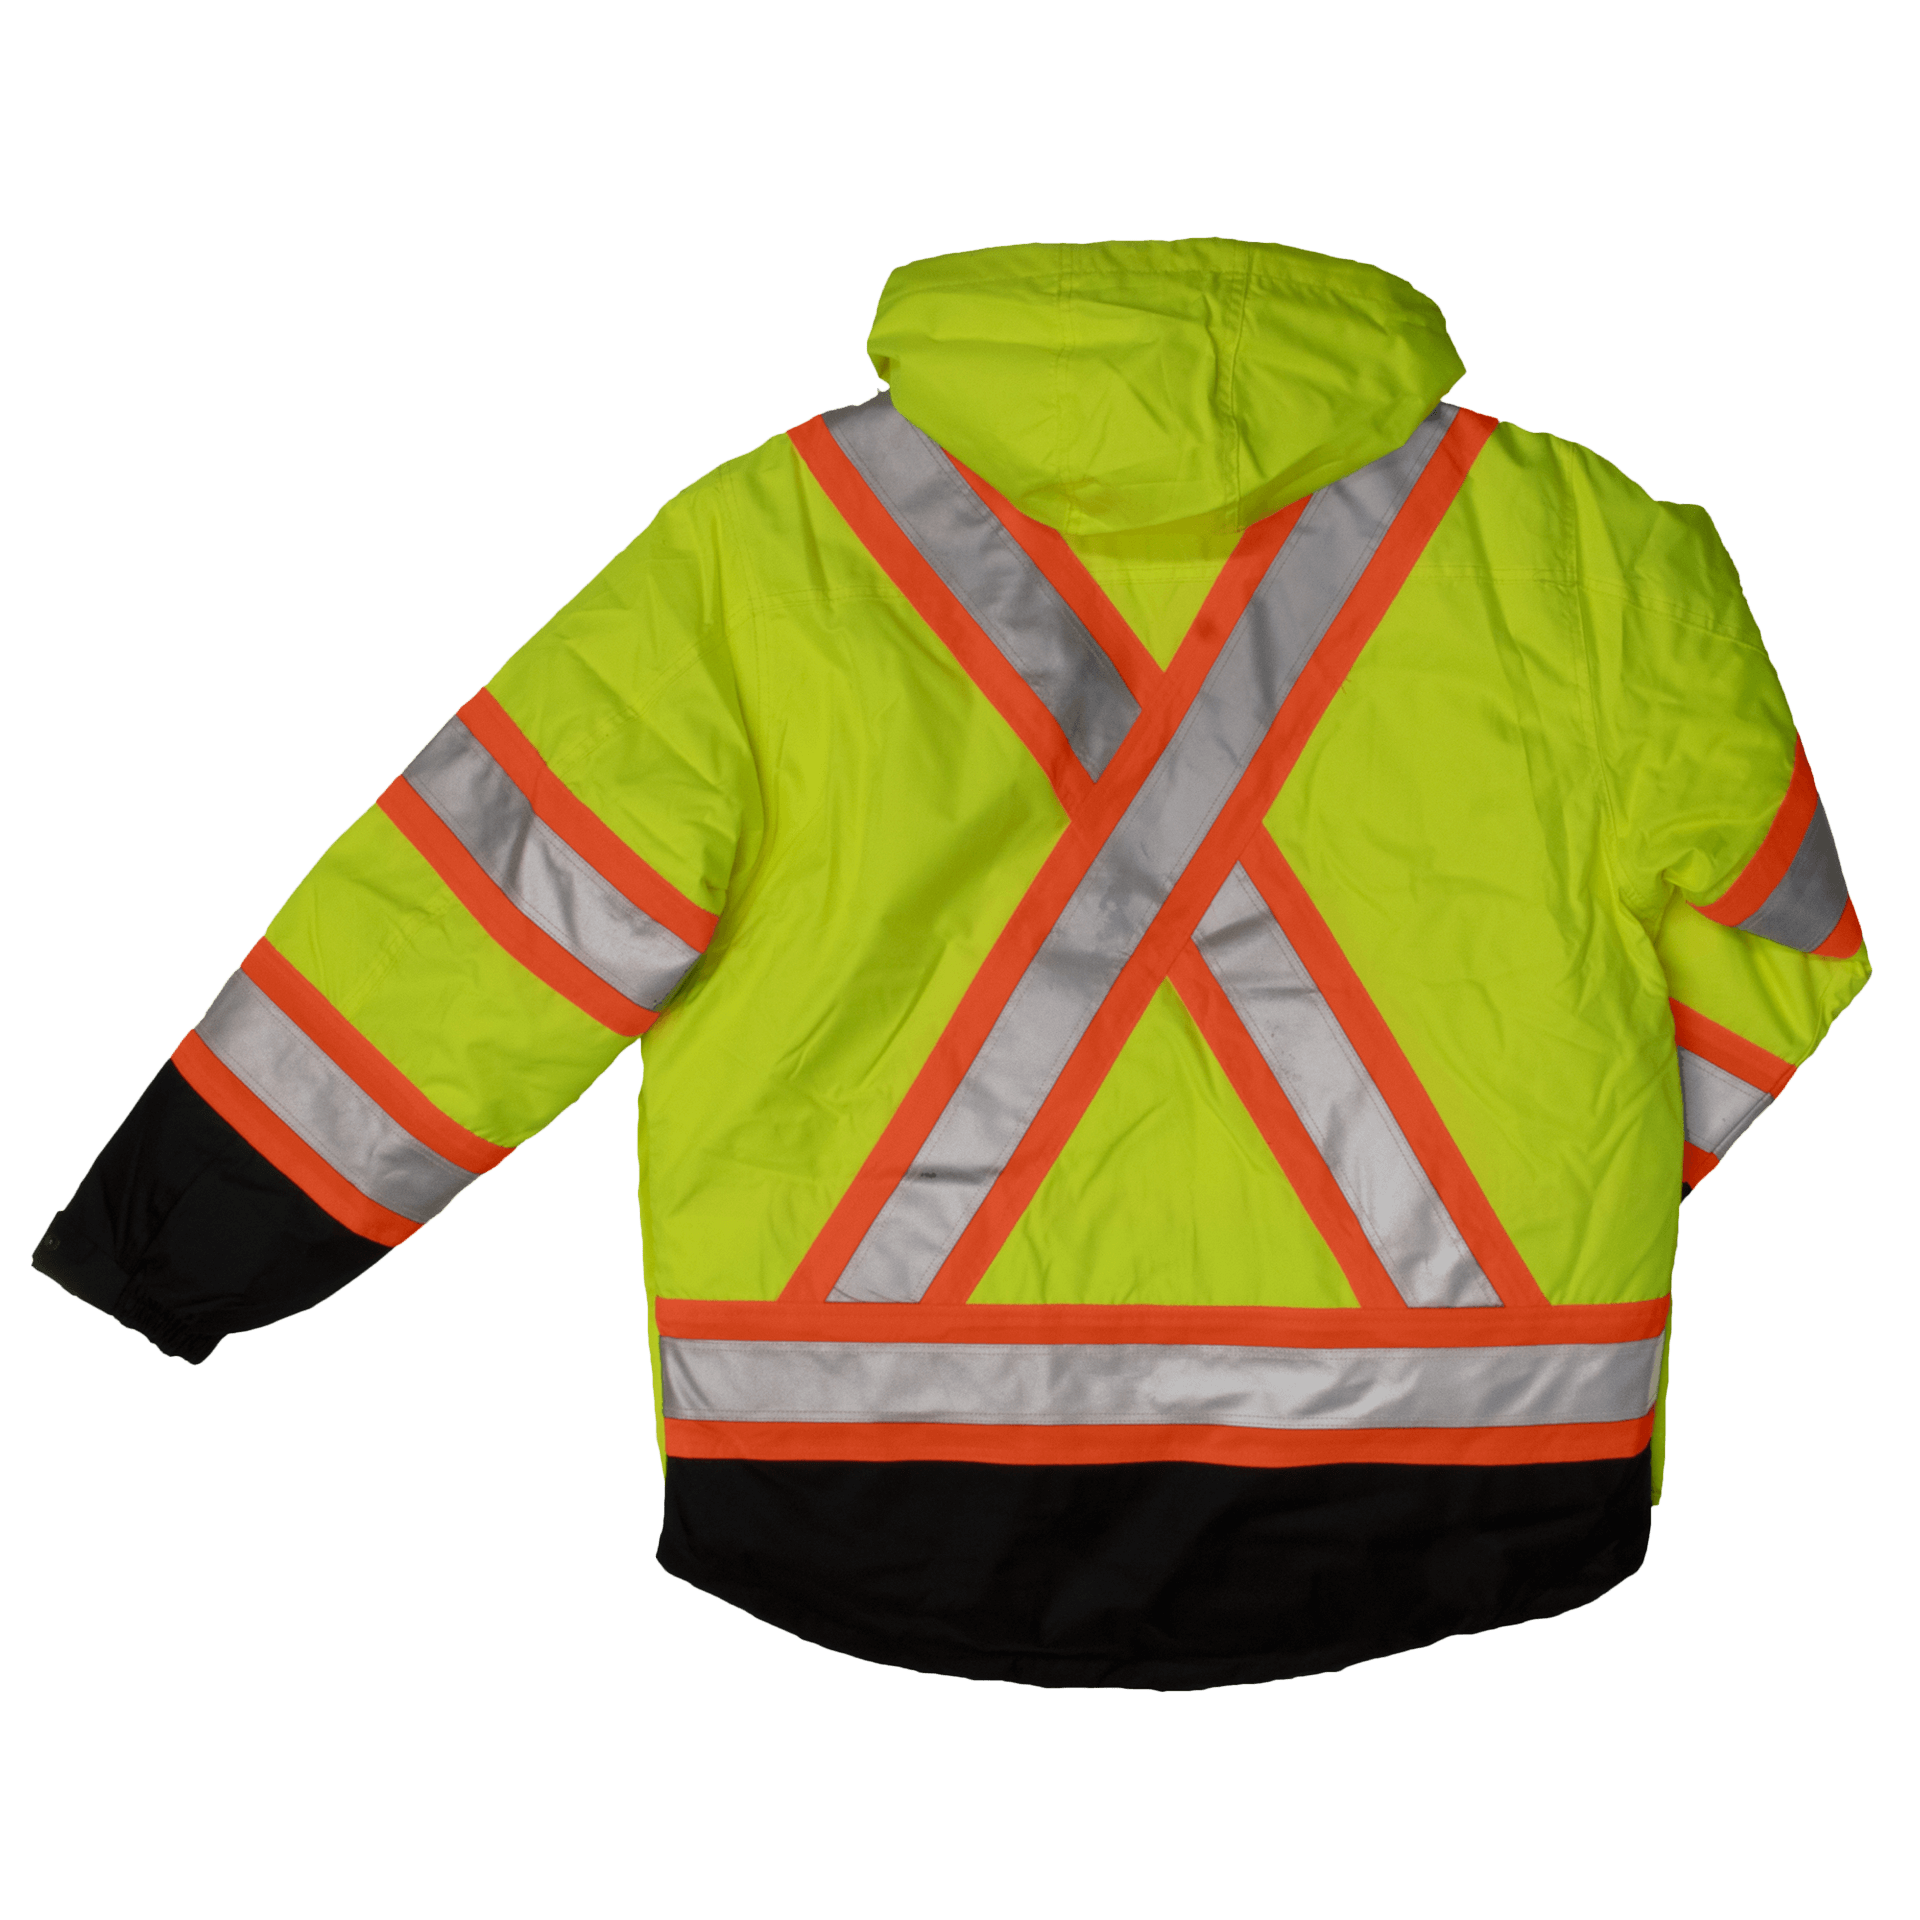 Tough Duck 5-in-1 Safety Jacket - S426 - Fluorescent Green - back